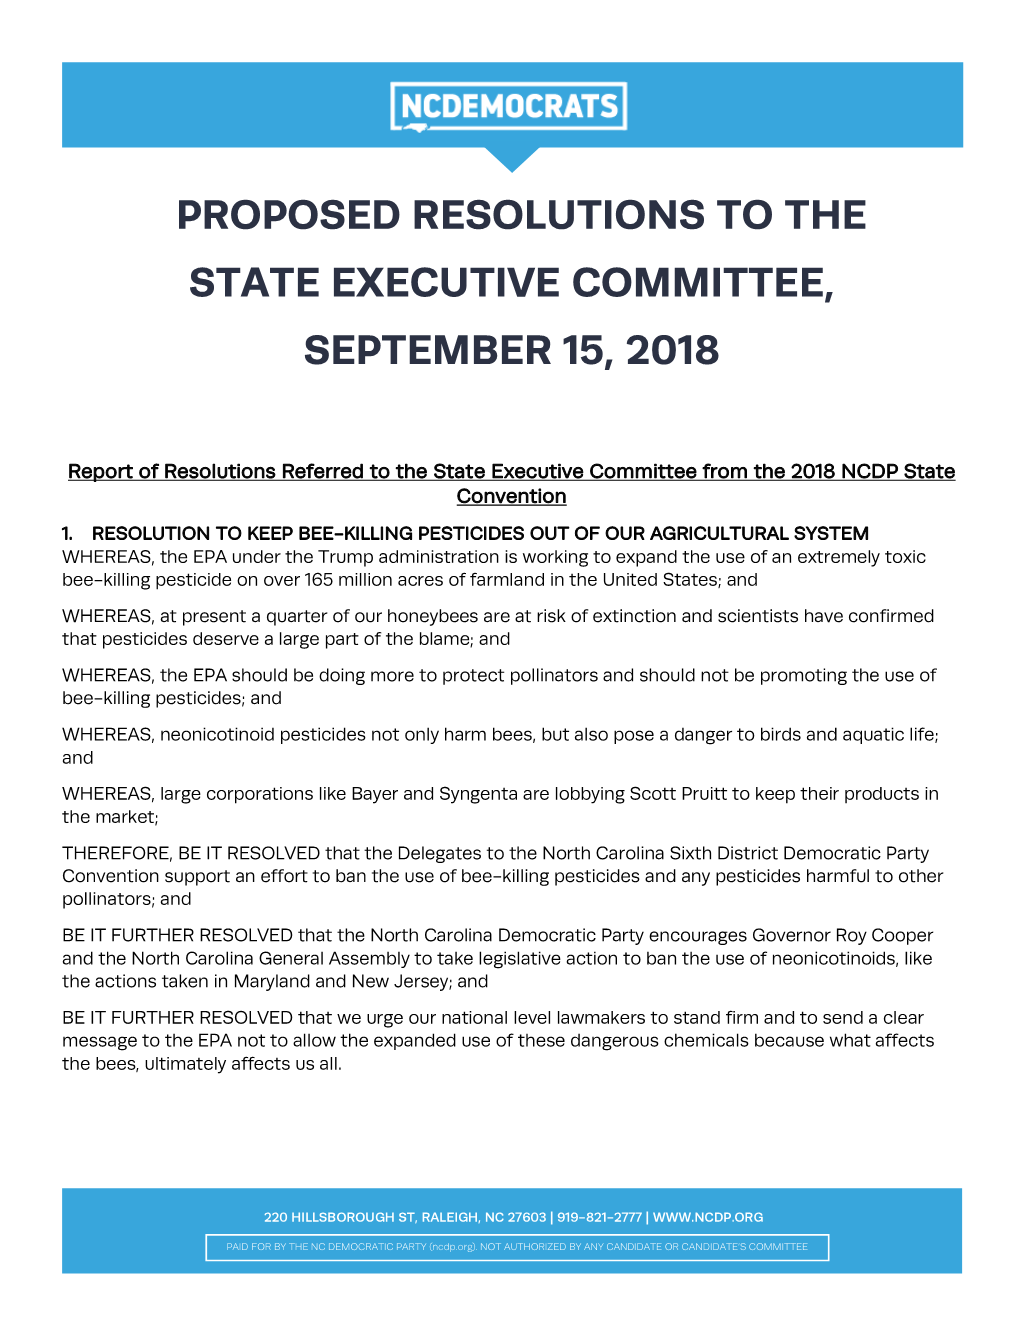 Proposed Resolutions to the State Executive Committee, September 15, 2018